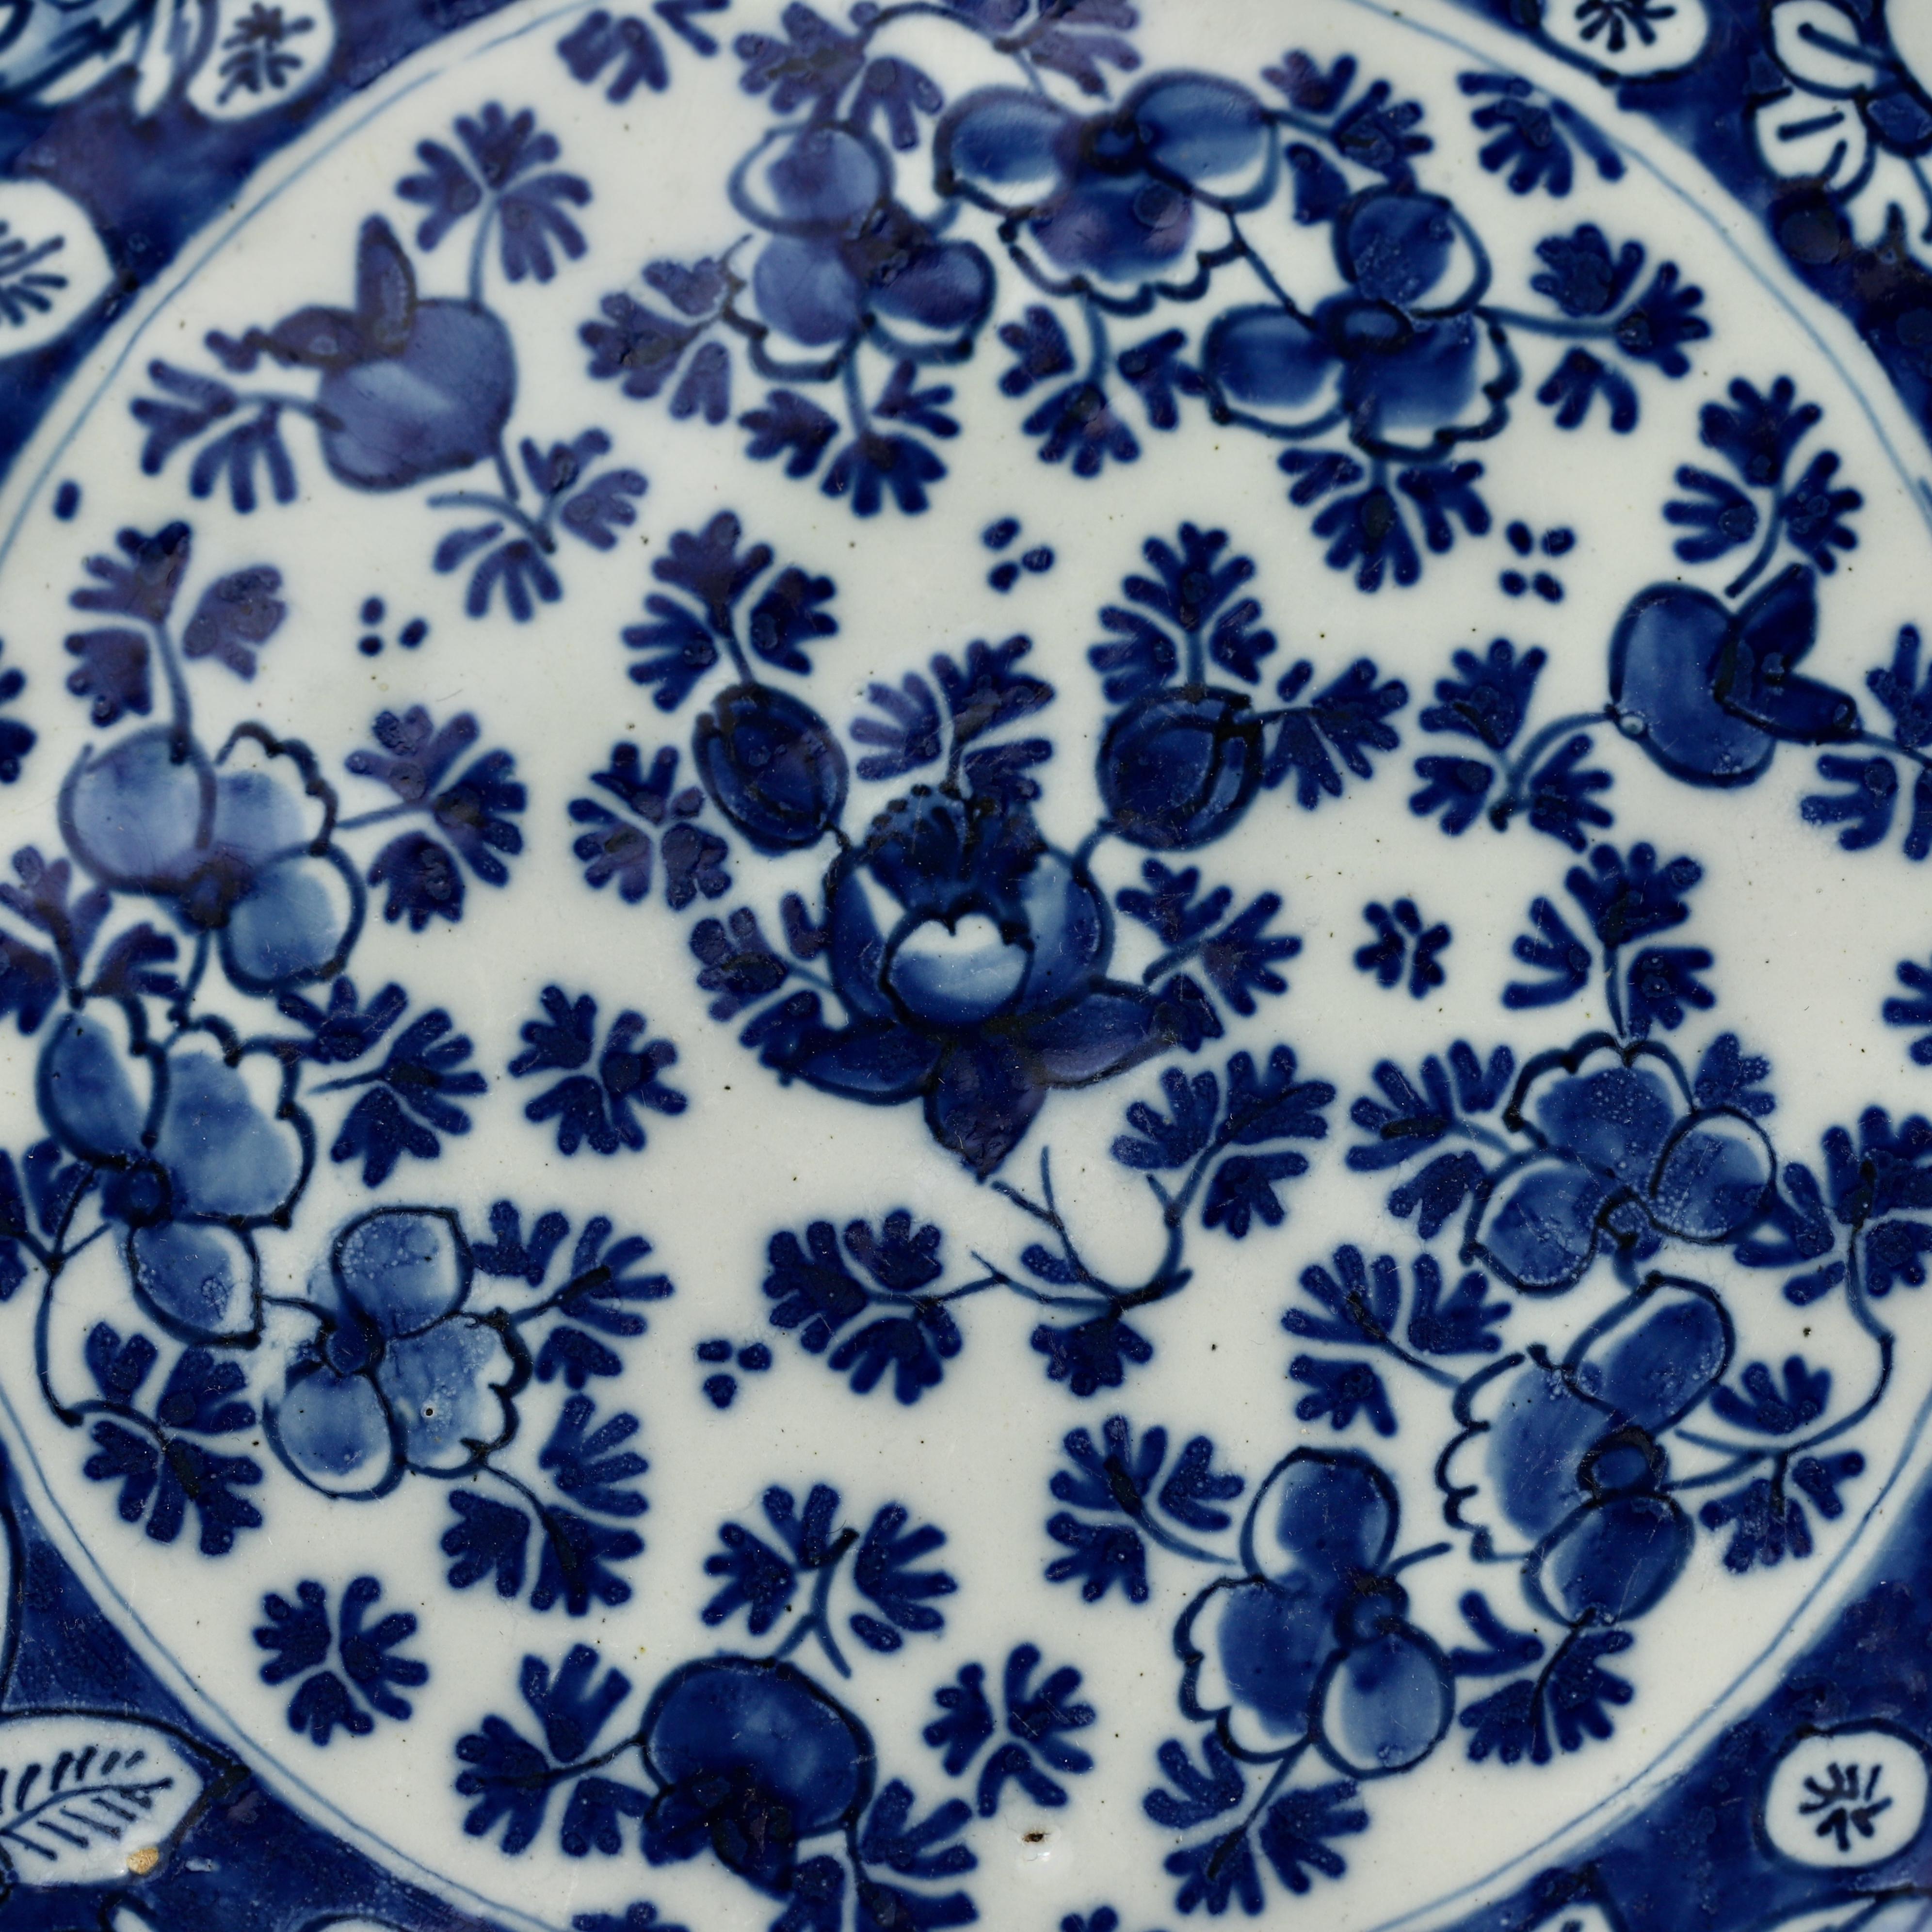 City: Delft
Workshop: De Metaale Pot
Owner: Lambertus van Eenhoorn
Date: 1691 - 1724

A fine and rare blue and white plate with floral design
Rose in the center surrounded by five cartouches also with flowers
Marked: LVE 4 0 HC or HVL or HG